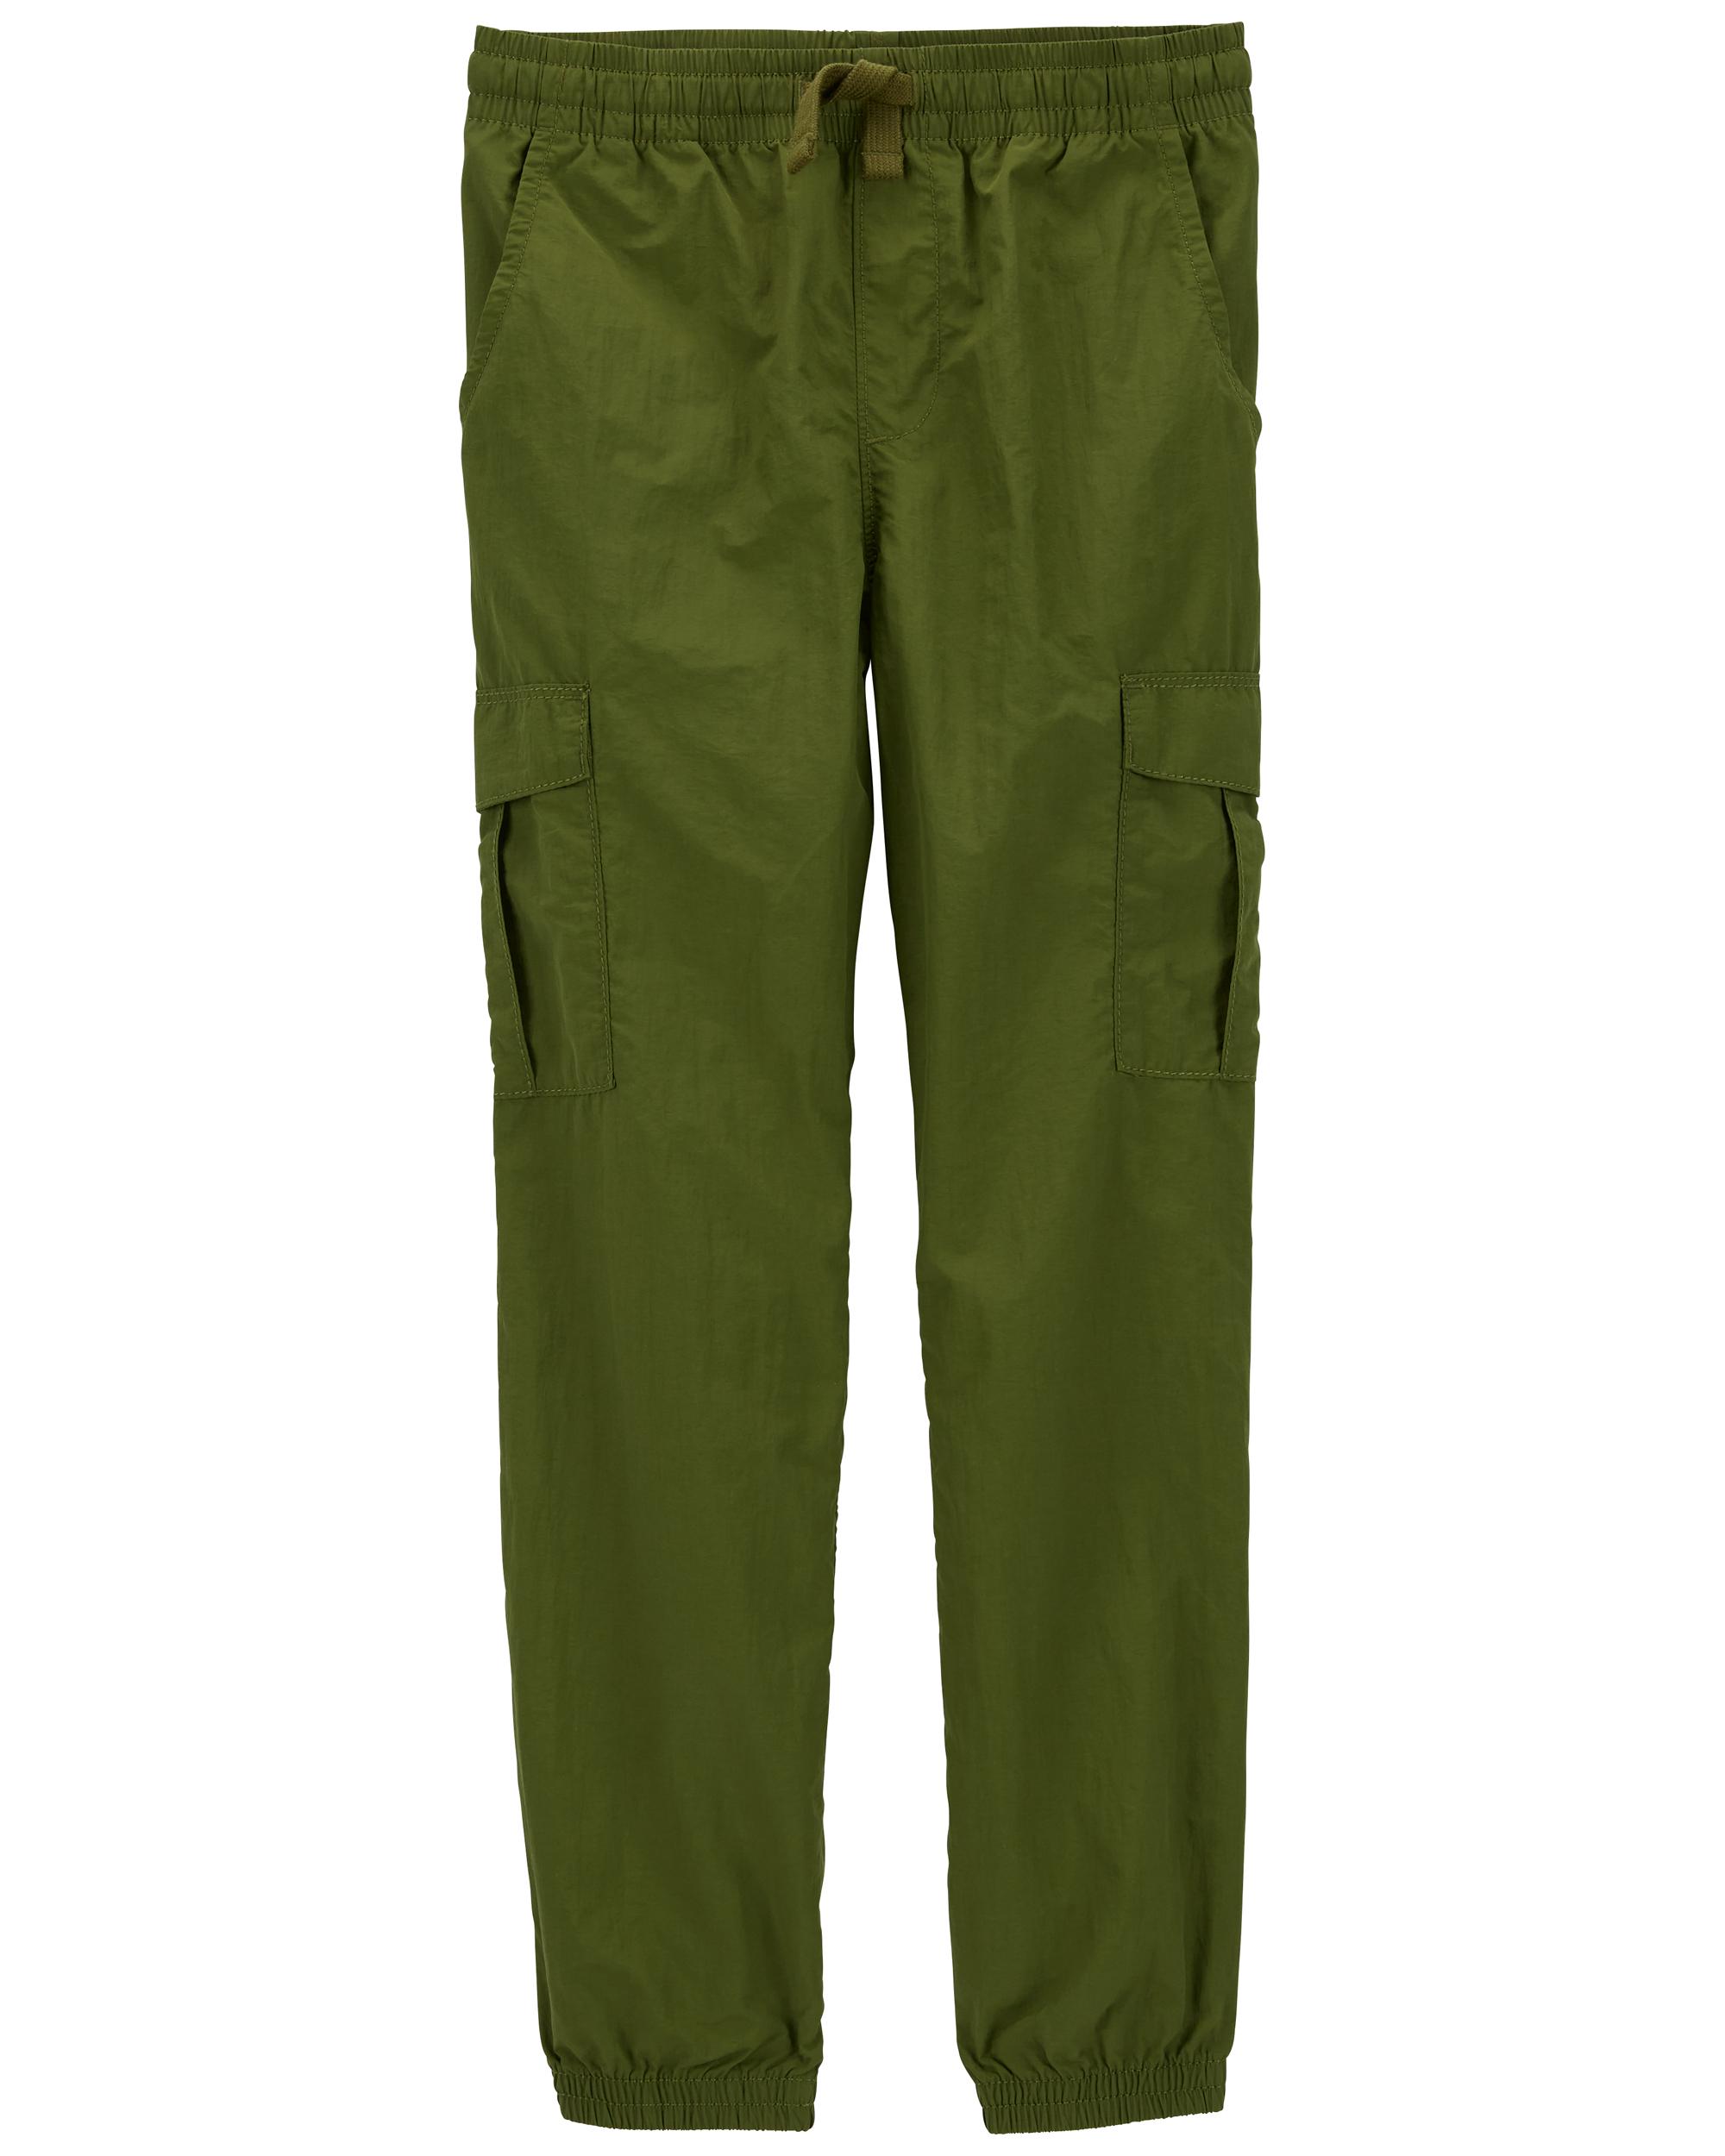 Green Pull-On Active Pants